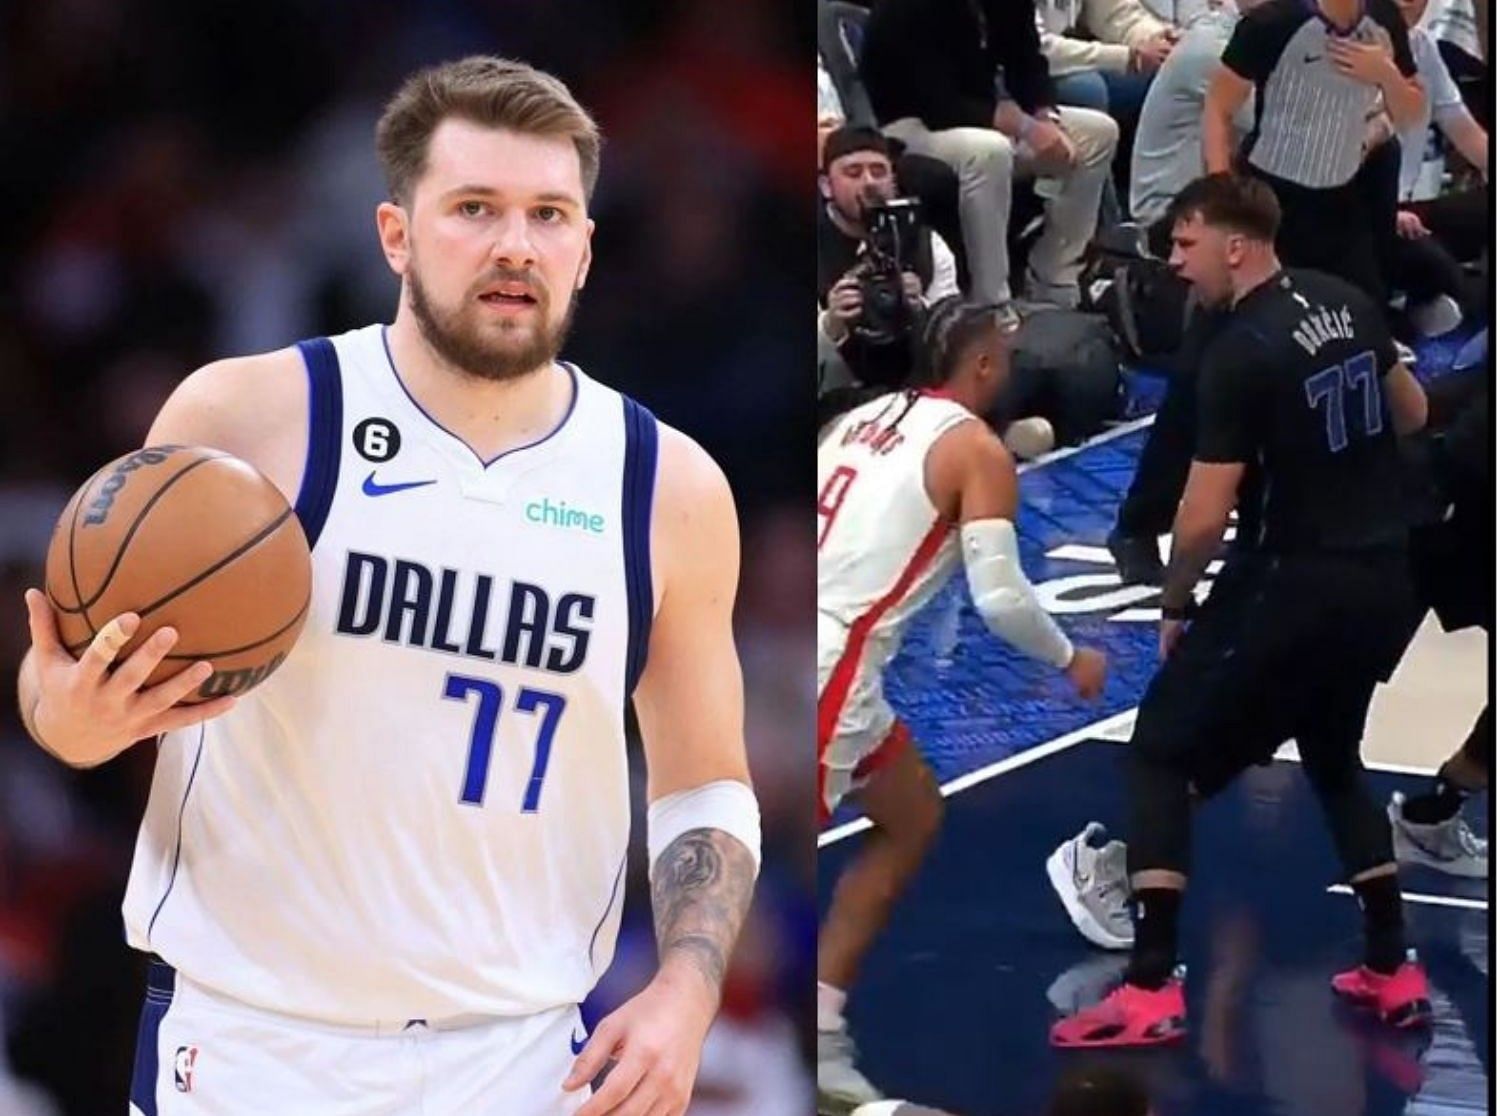 Dallas Mavericks All-Star Luka Doncic (L) had some words to say to Dillon Brooks of the Houston Rockets after he missed a layup in their game on Tuesday.